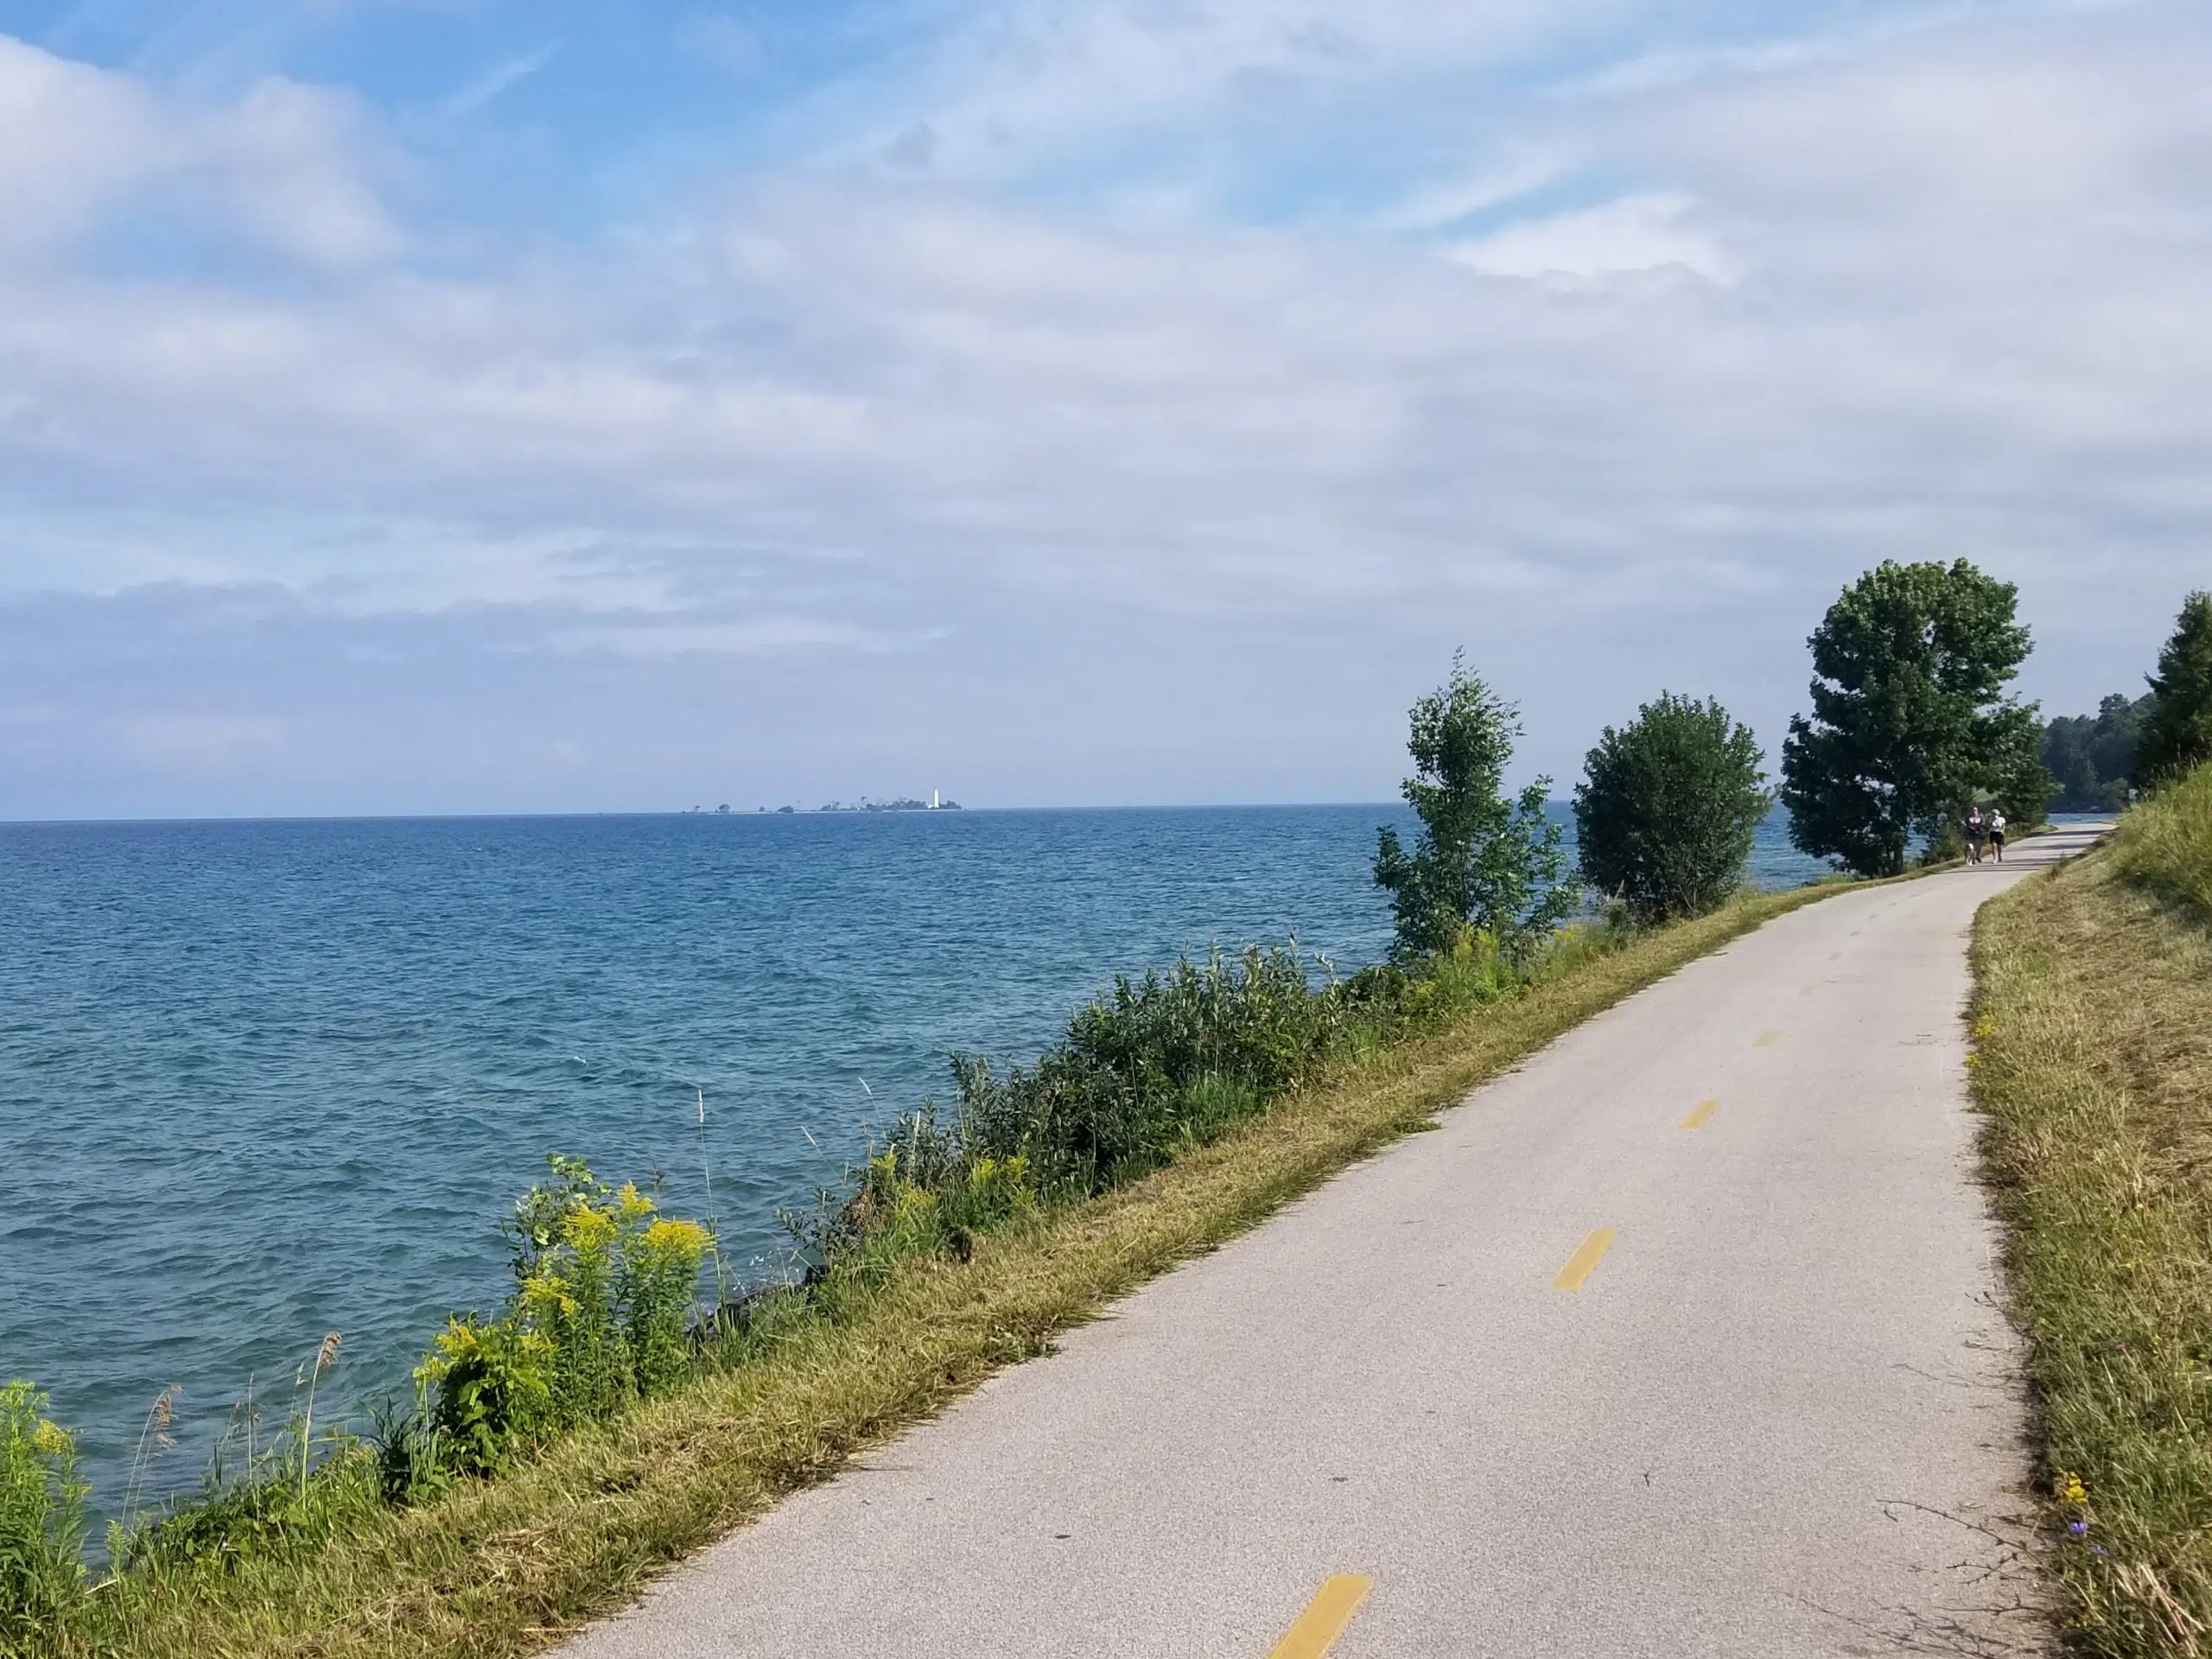 Road Closed As Work Gets Underway On North Shore Trail In Port Elgin